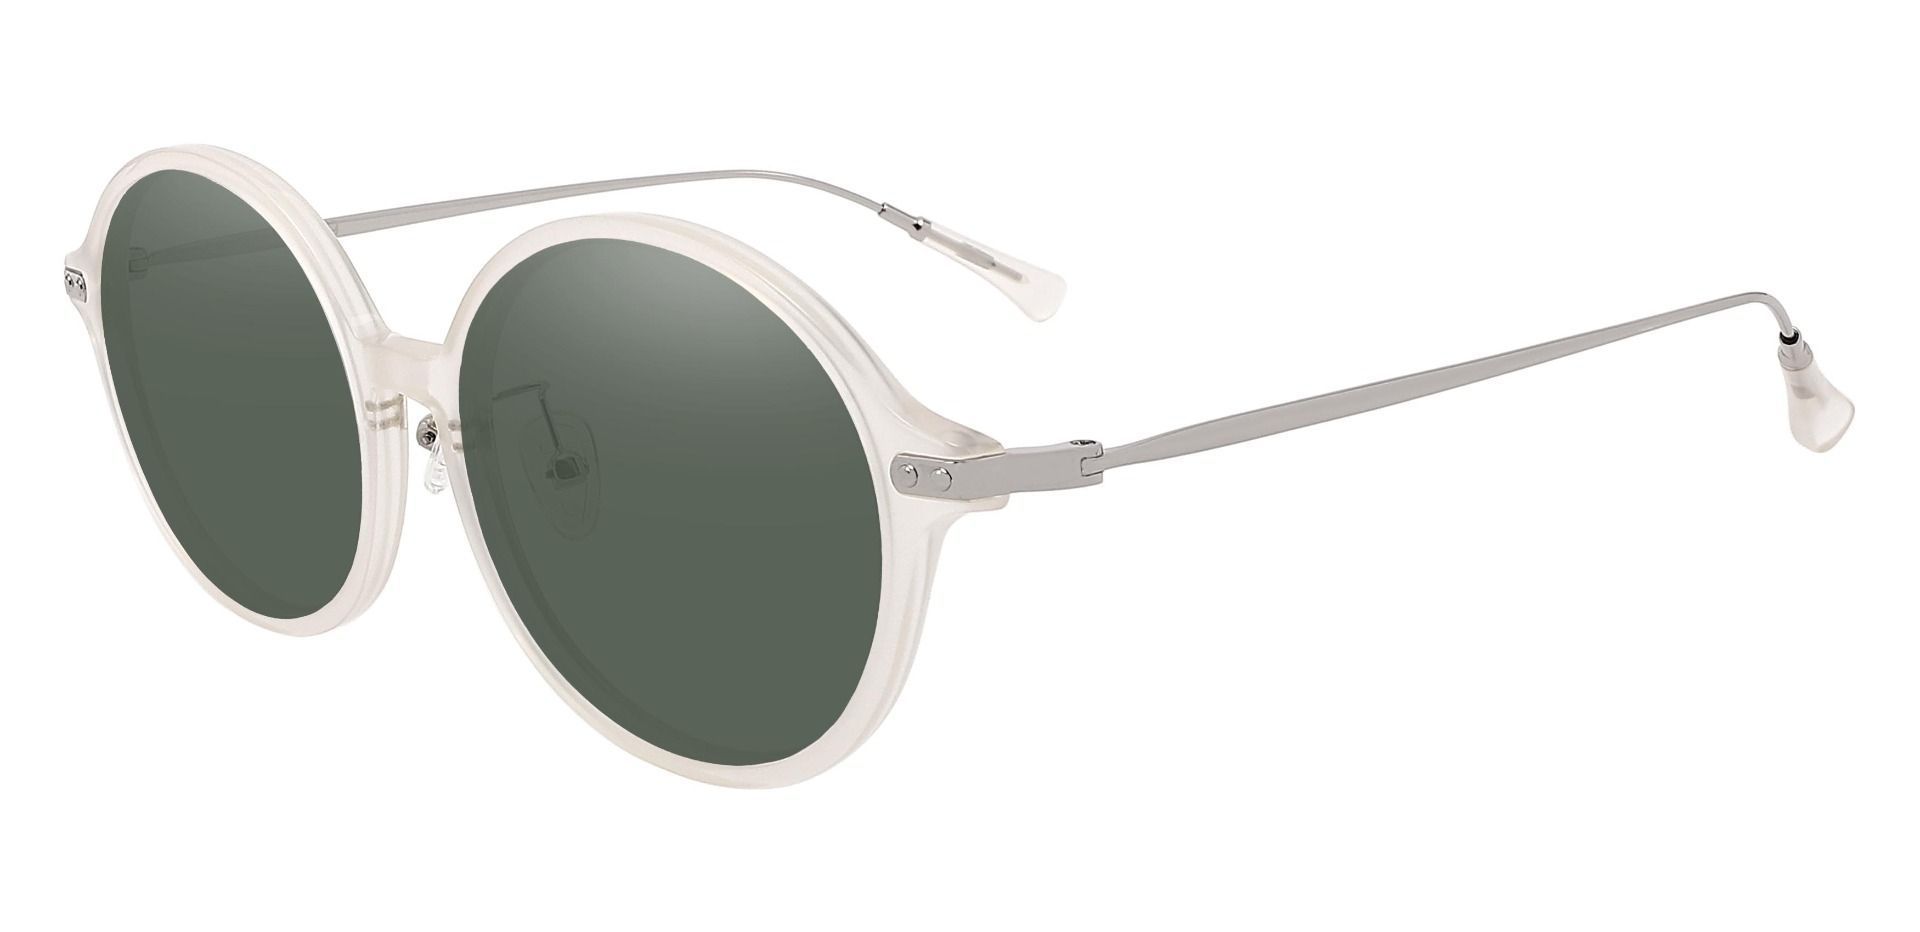 Princeton Round Progressive Sunglasses - Clear Frame With Green Lenses